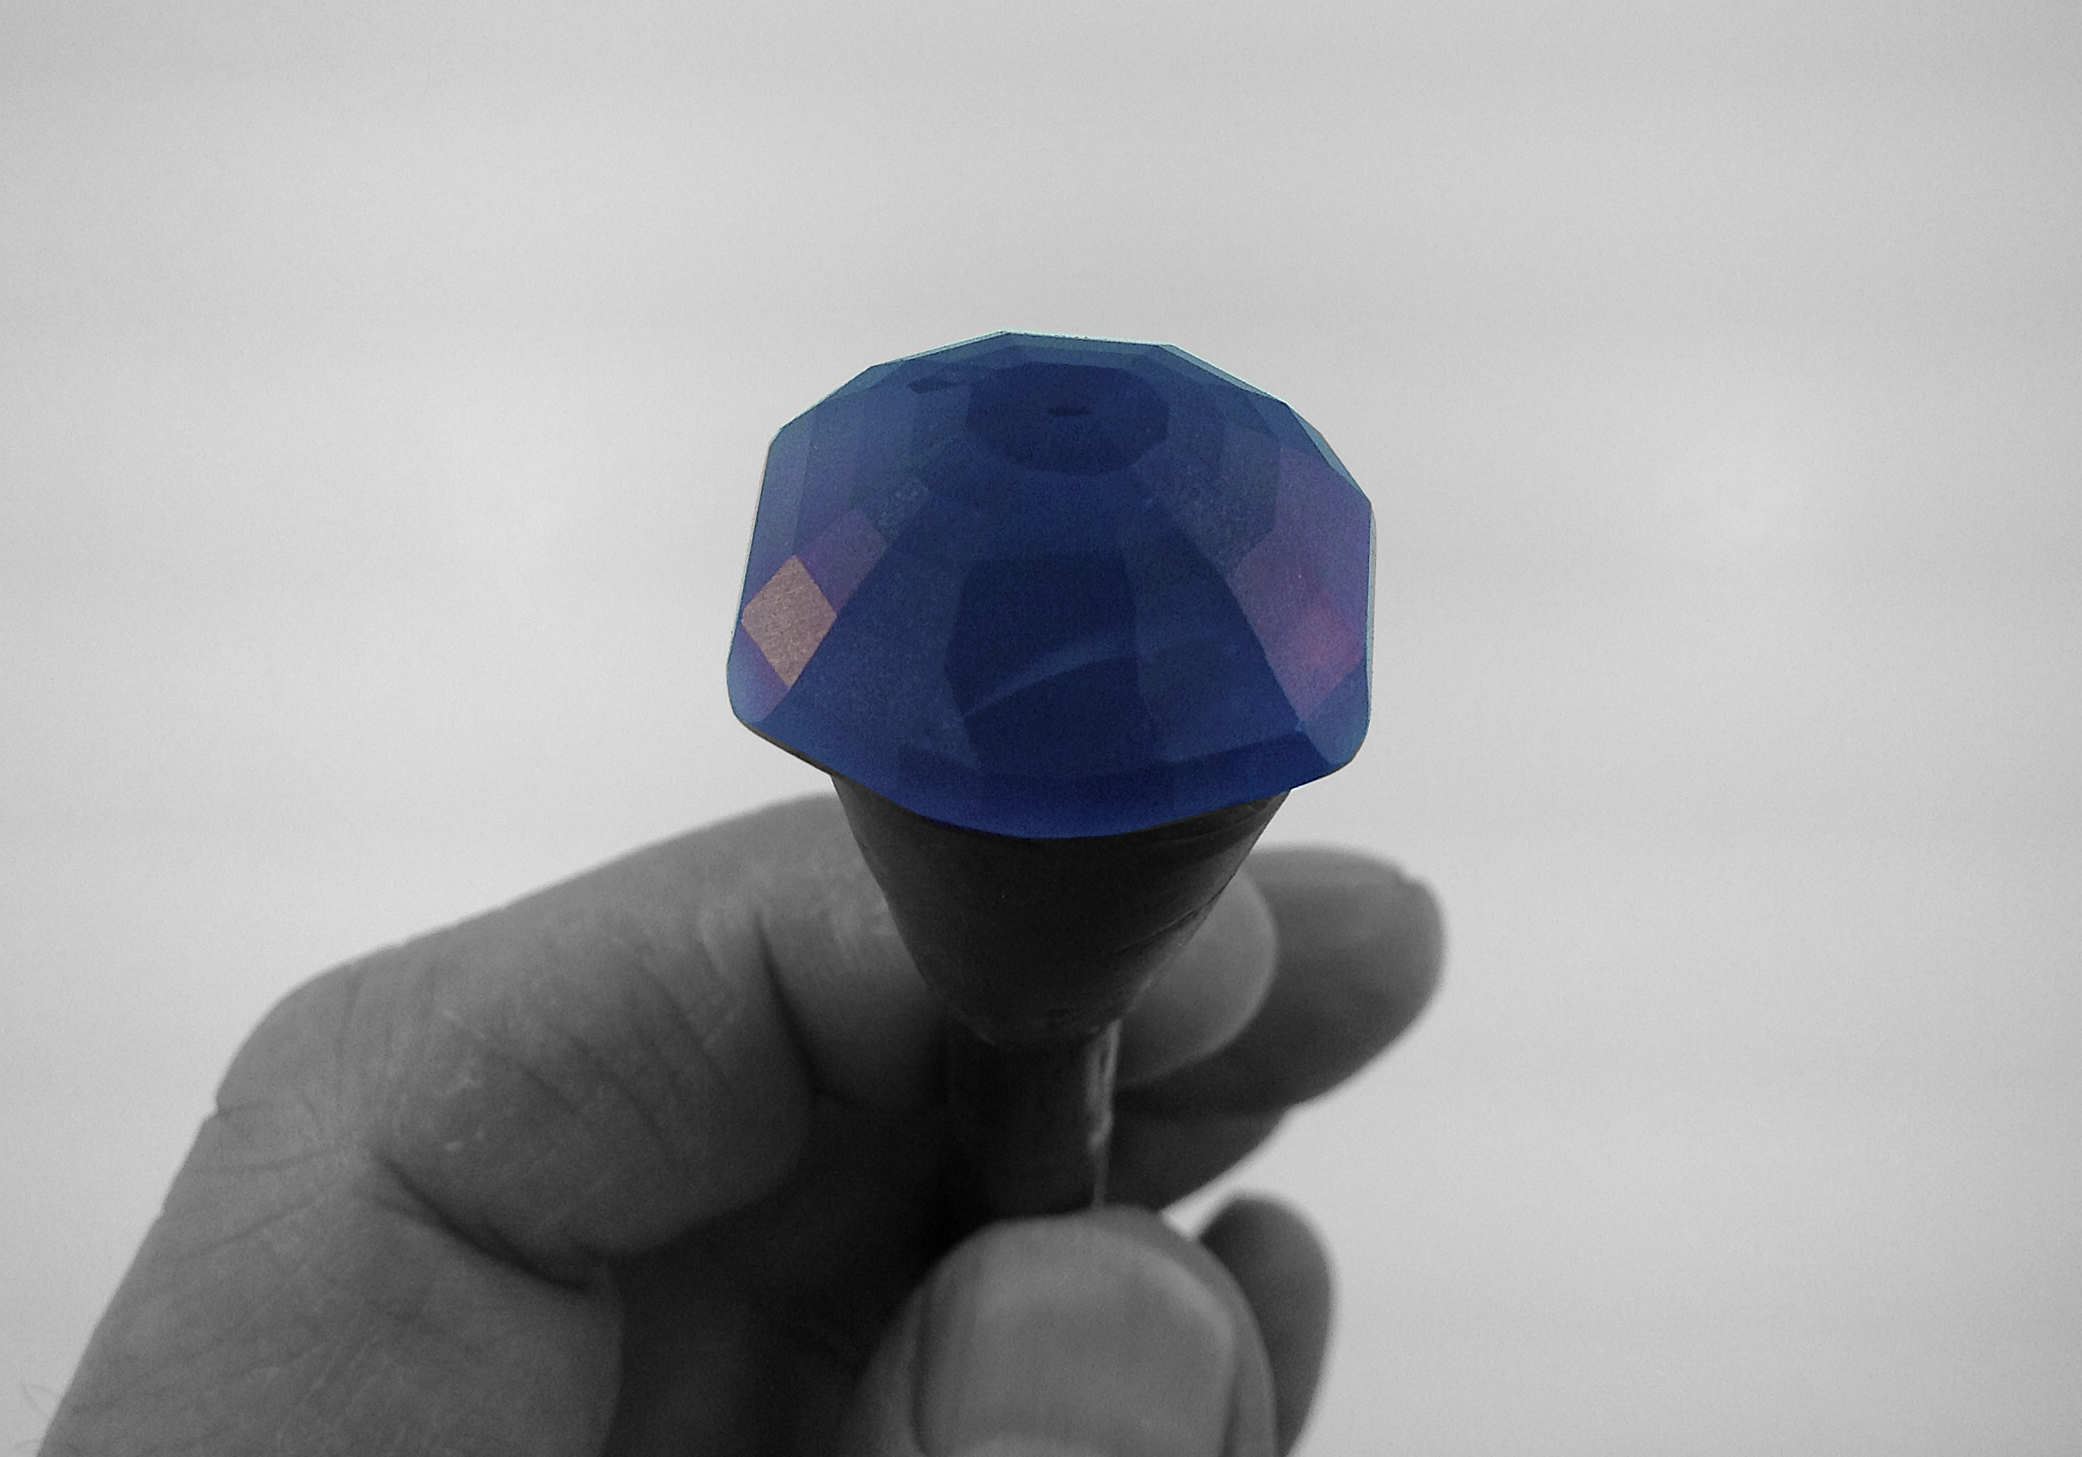 A 50 + carat fancy shaped sapphire on the "stick."